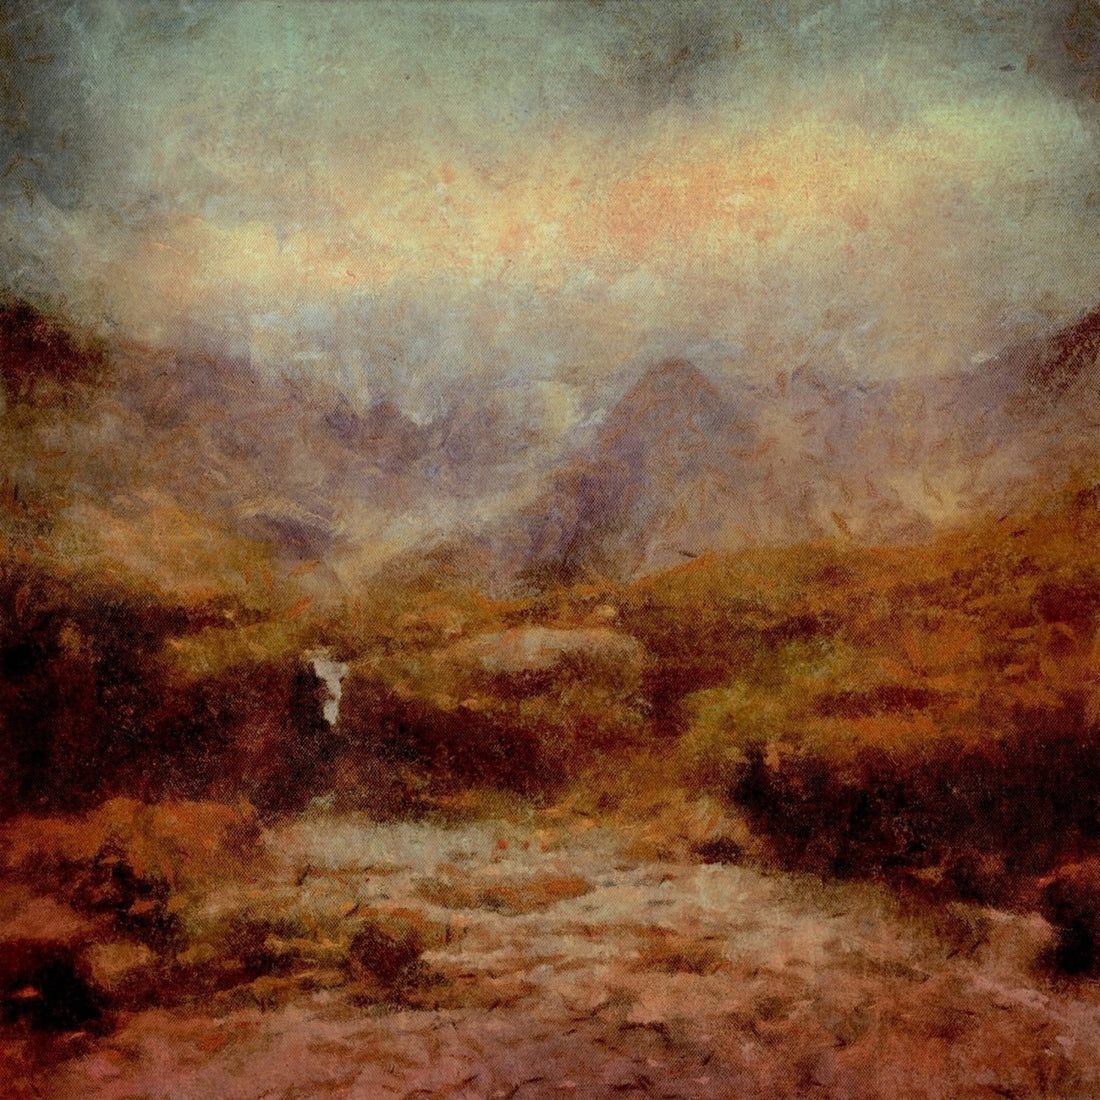 The Brooding Fairy Pools Skye Painting Fine Art Prints | An Artwork from Scotland by Scottish Artist Hunter